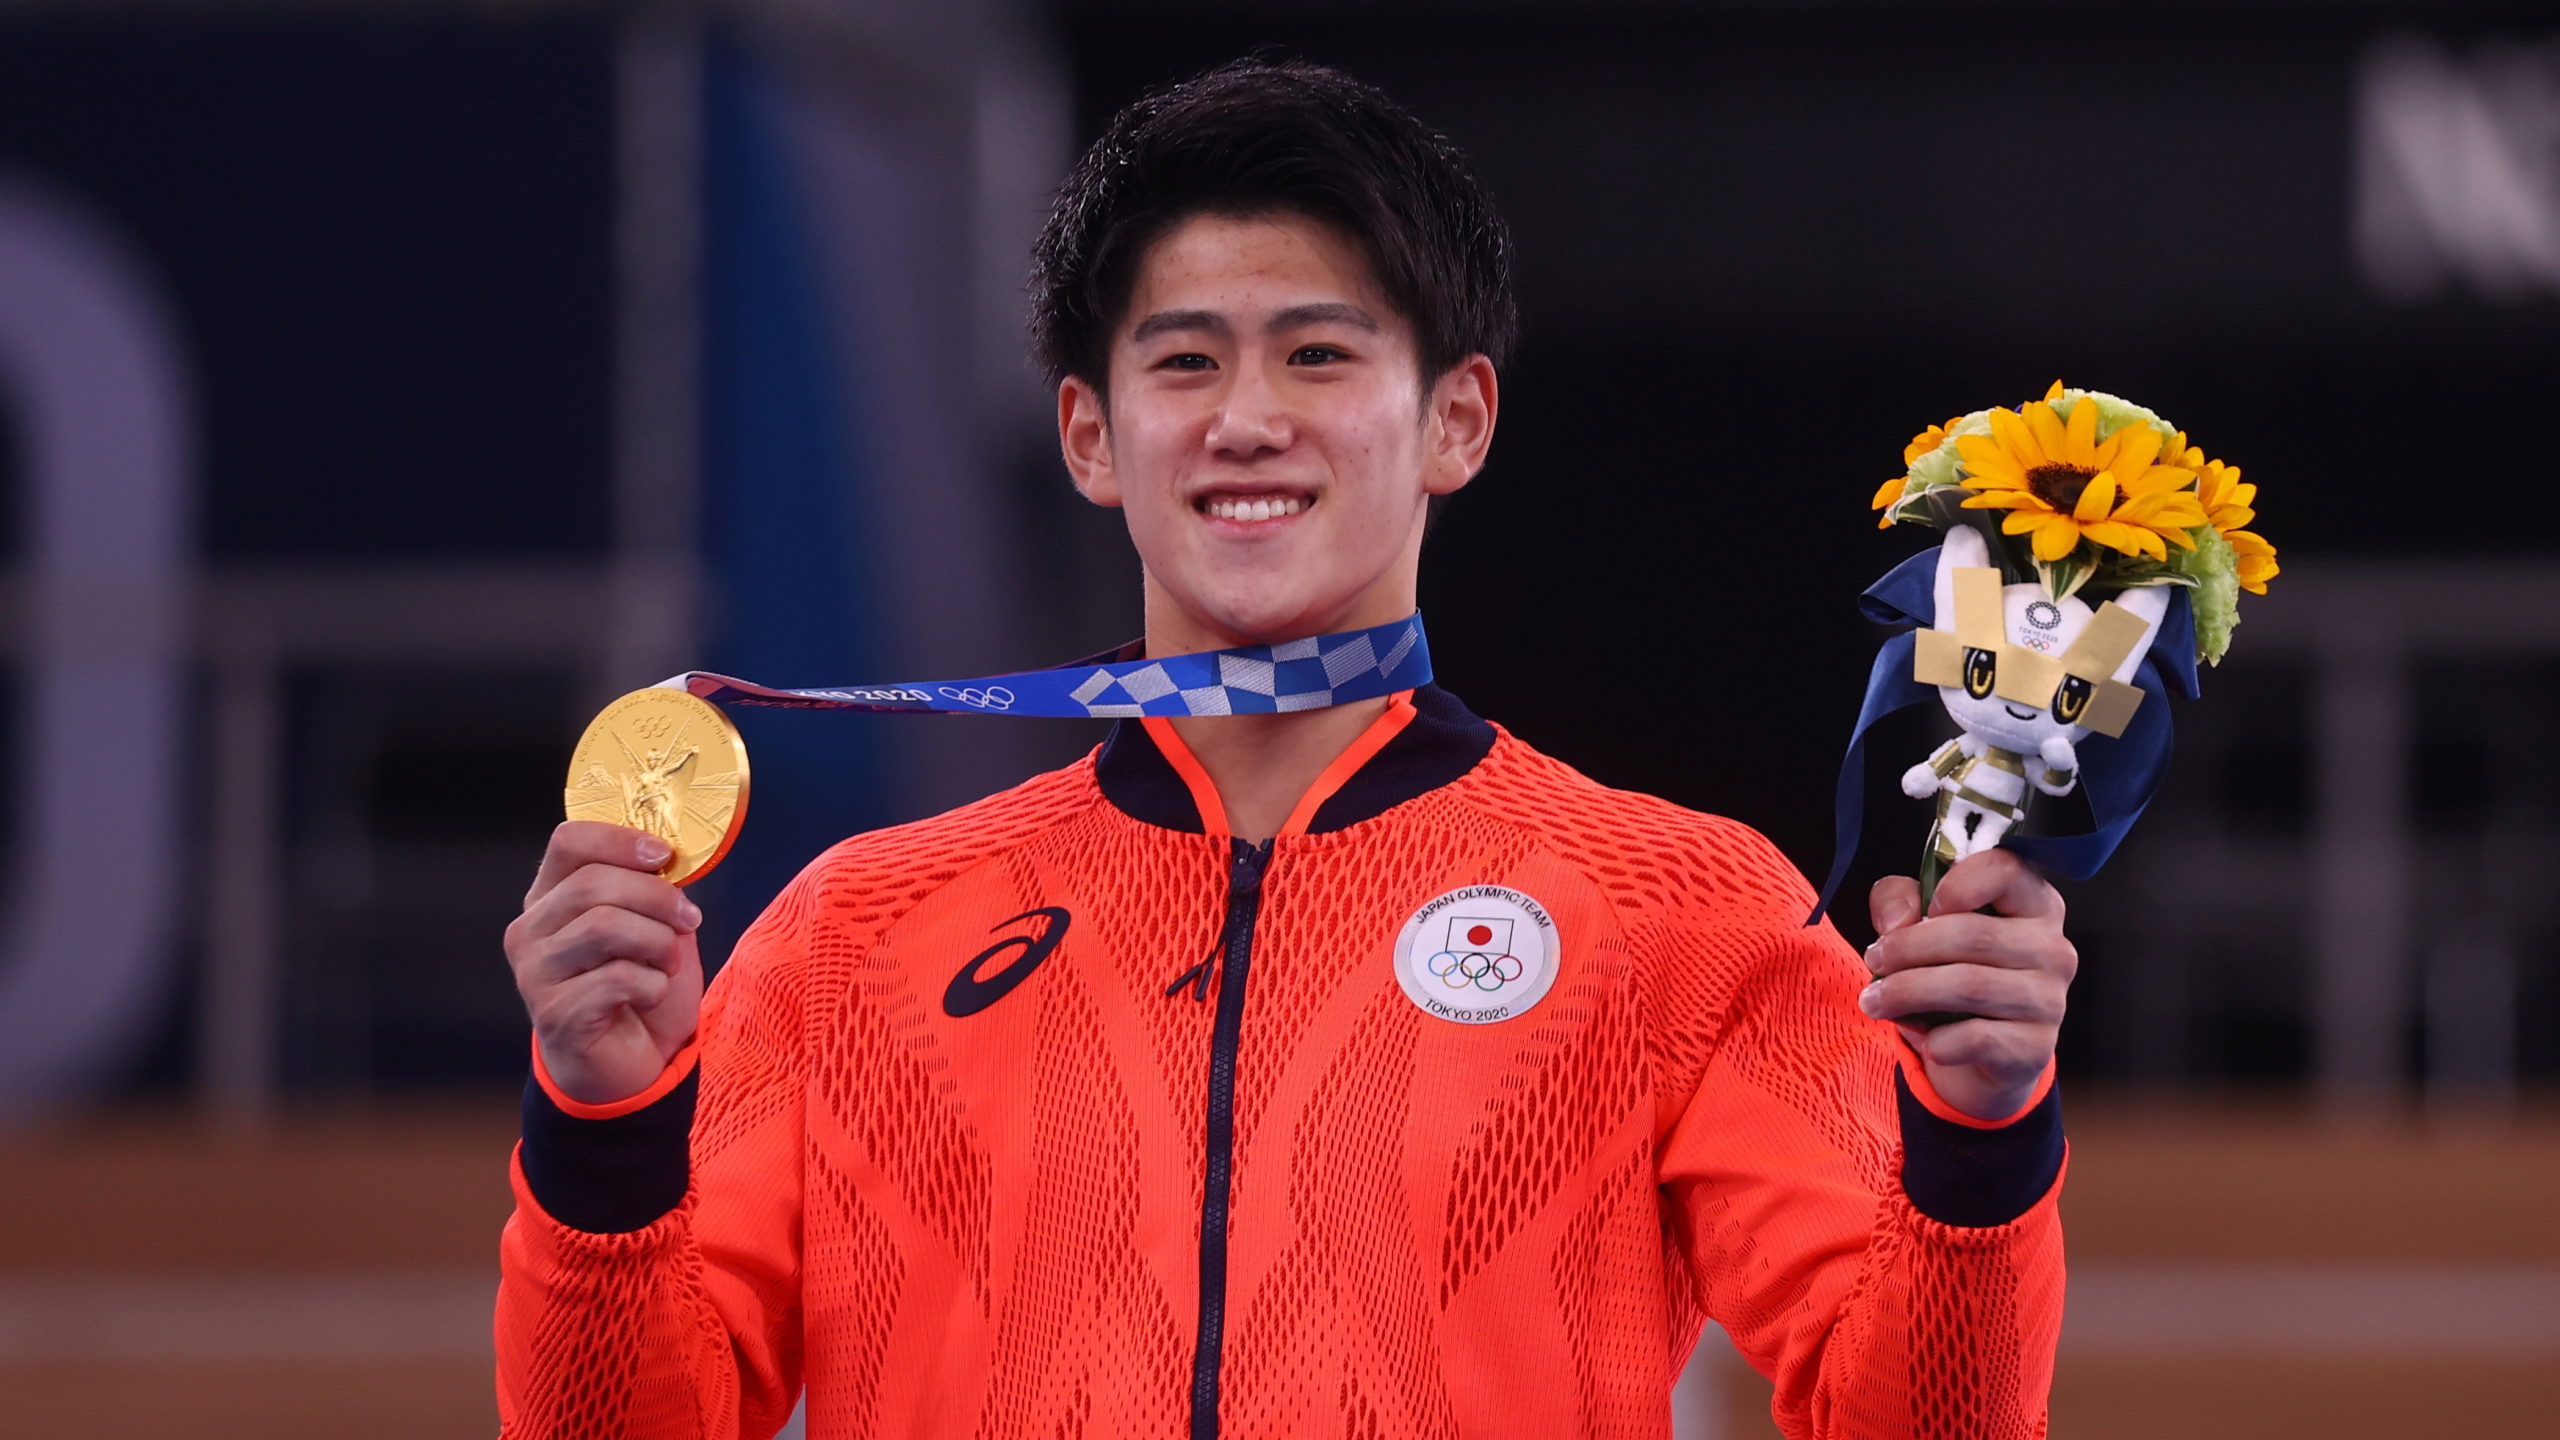 Daiki Hashimoto of Japan celebrates after winning the gold medal in the men's all-around event of the Tokyo Olympics on July 28, 2021.